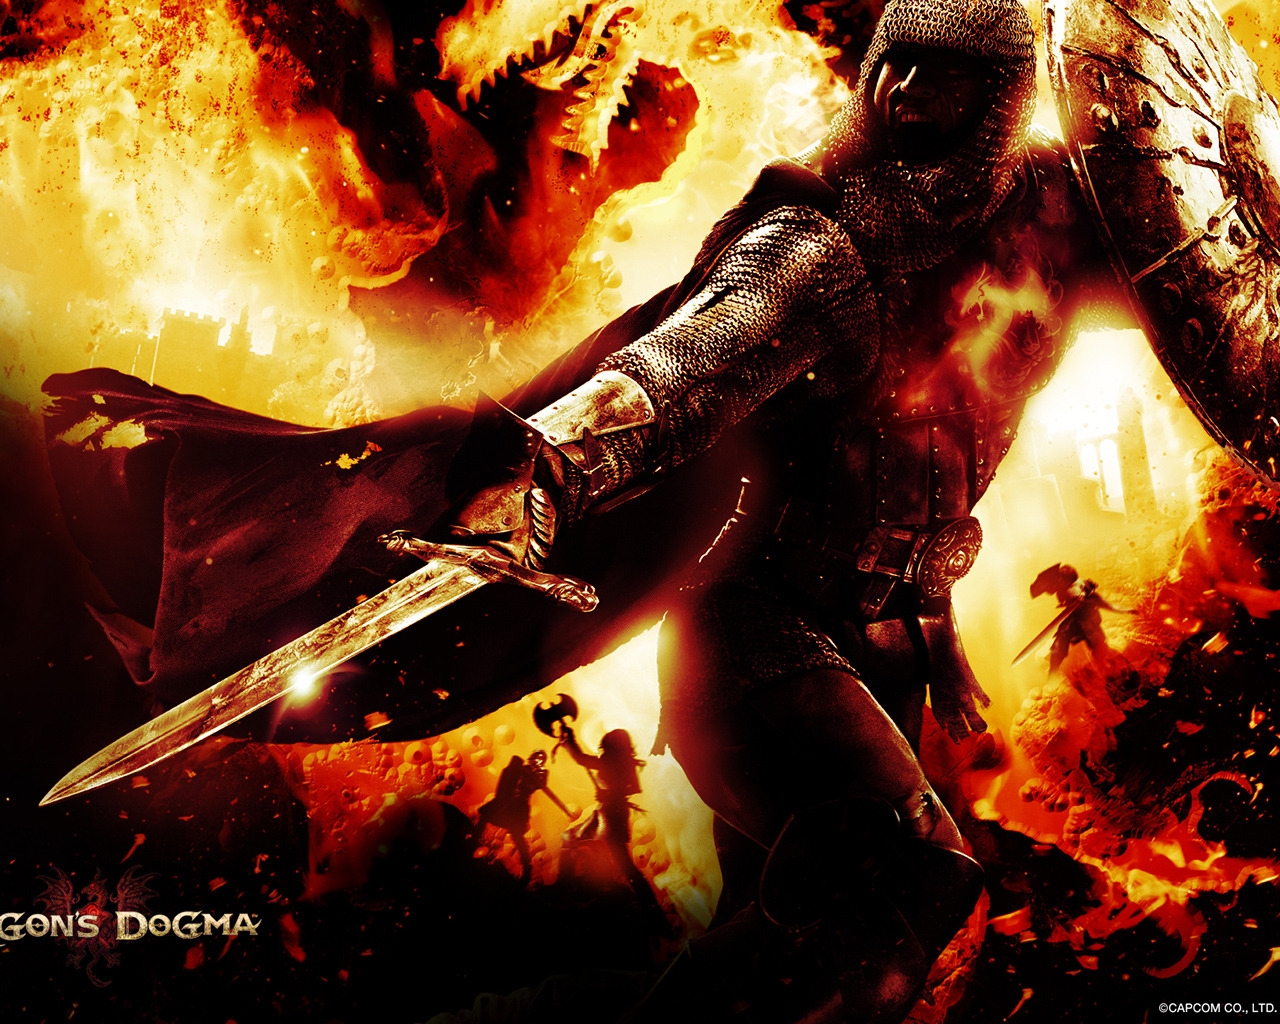 Dragons Dogma Fighter for 1280 x 1024 resolution